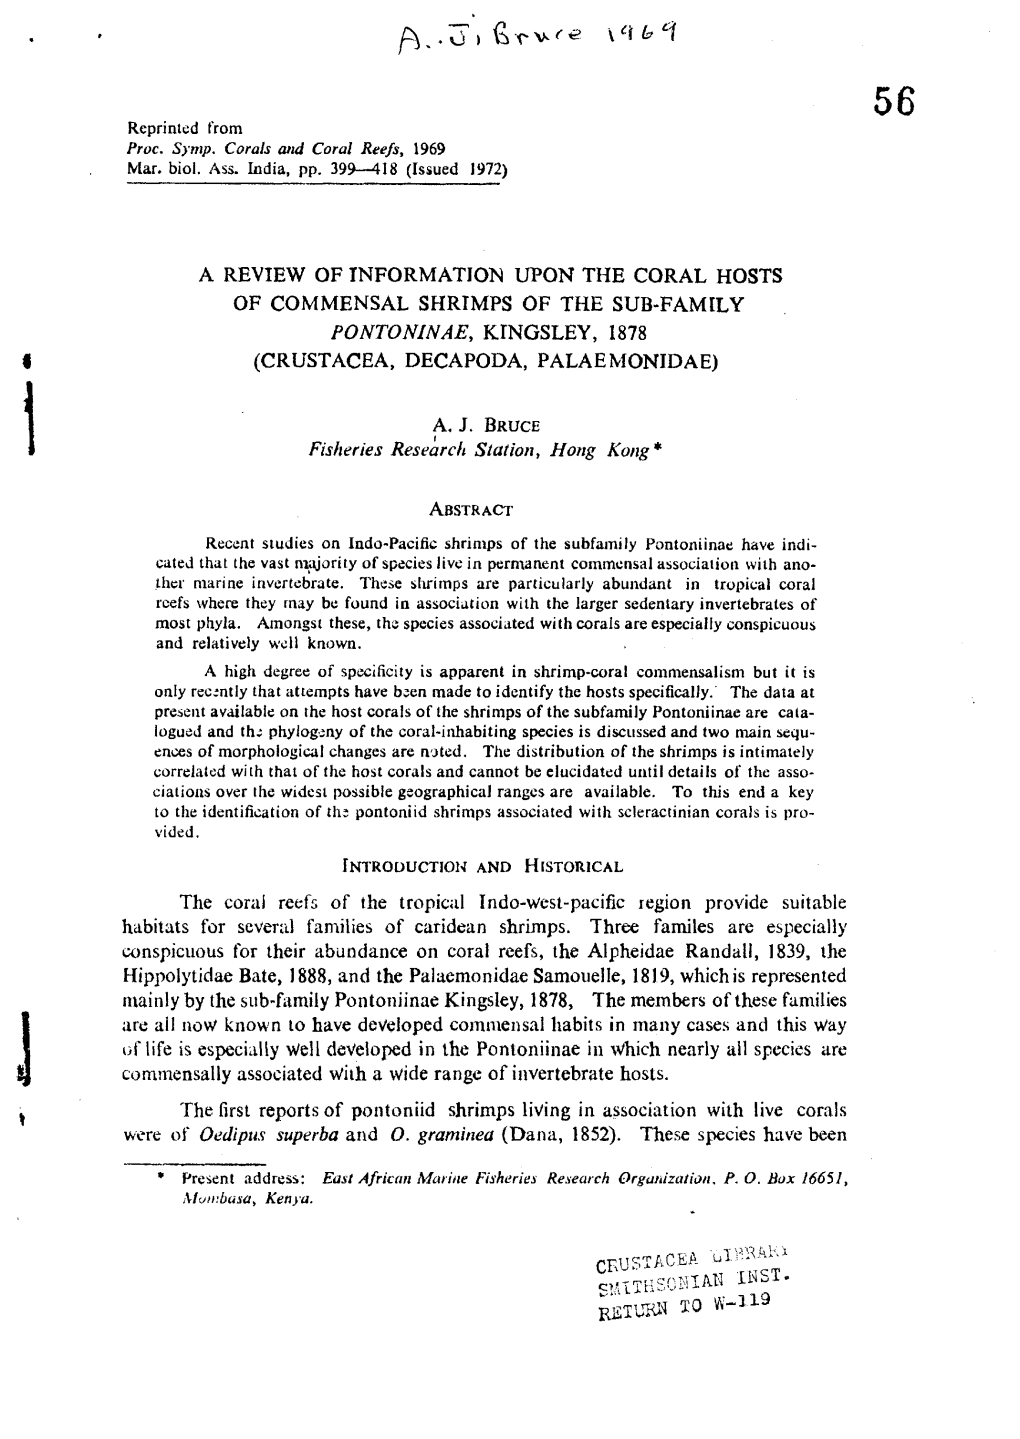 A Review of Information Upon the Coral Hosts of Commensal Shrimps of the Sub-Family Pontoninae, Kingsley, 1878 (Crustacea, Decapoda, Palae Monidae)